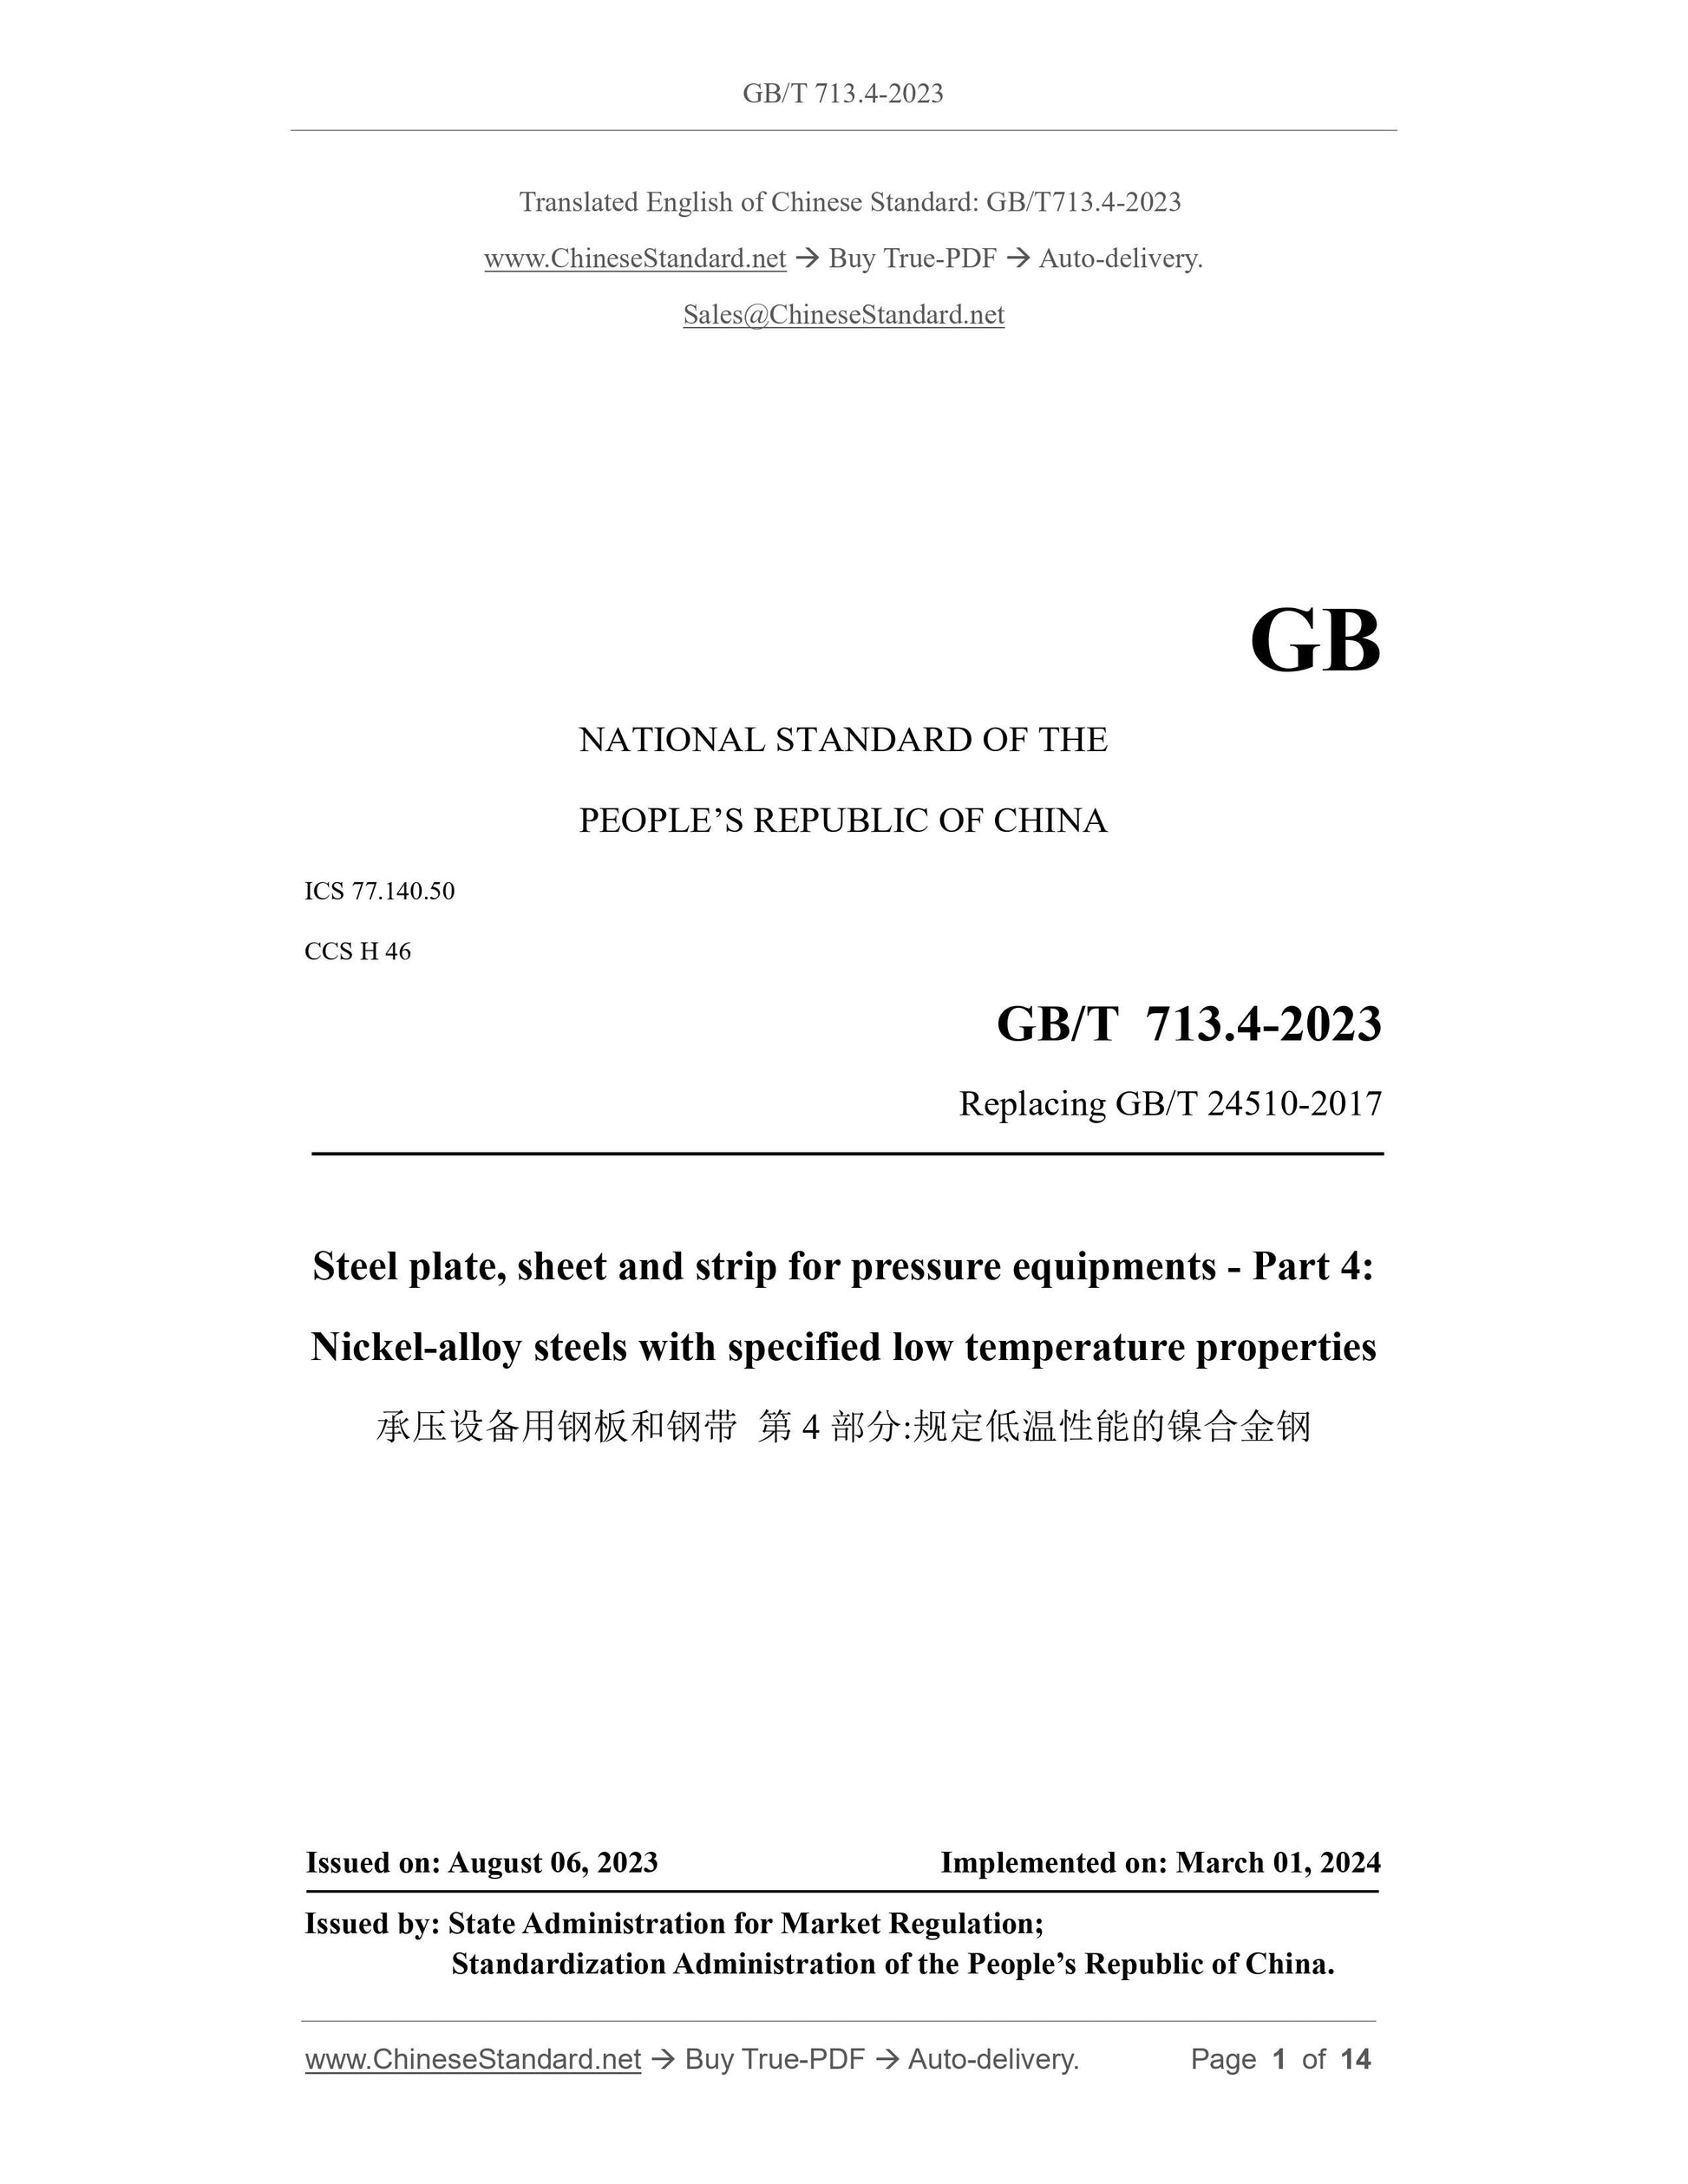 GB/T 713.4-2023 Page 1